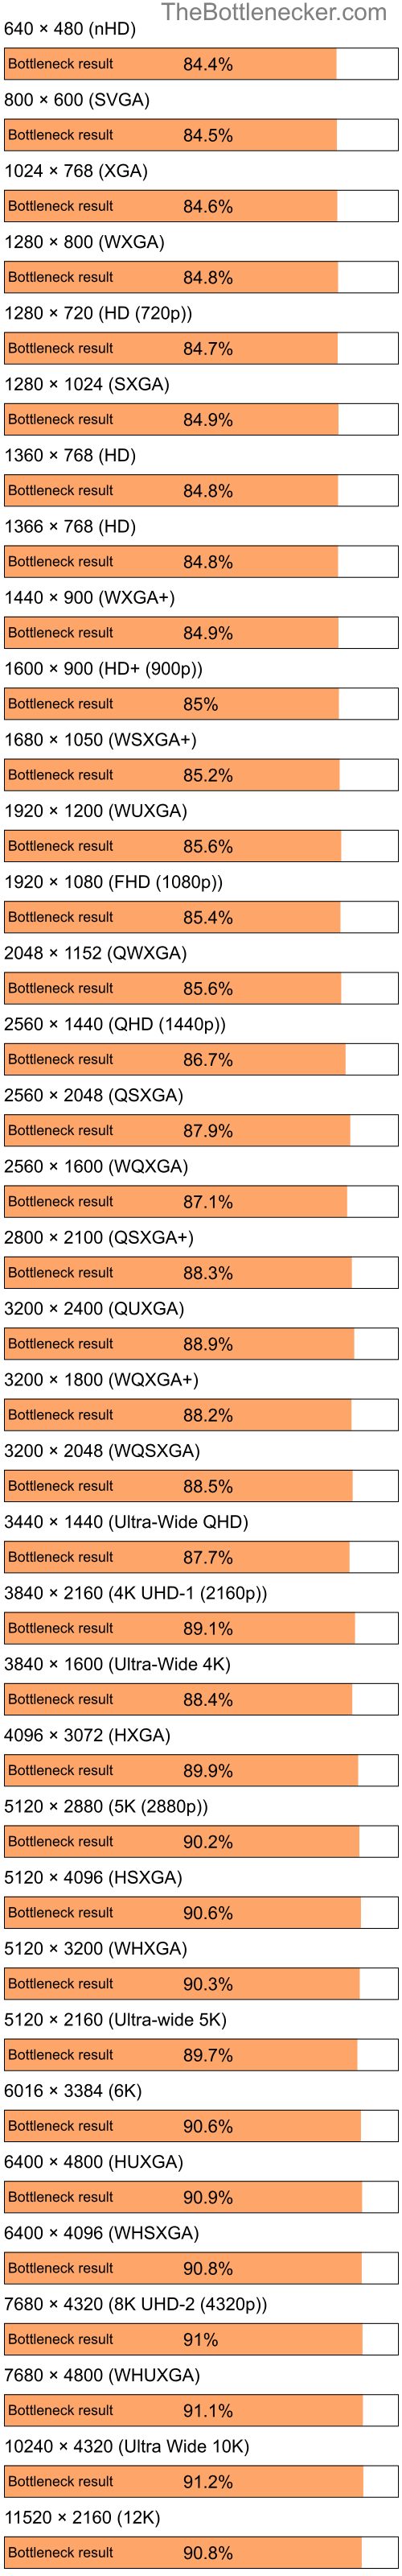 Bottleneck results by resolution for Intel Celeron and NVIDIA GeForce 6150 in Graphic Card Intense Tasks